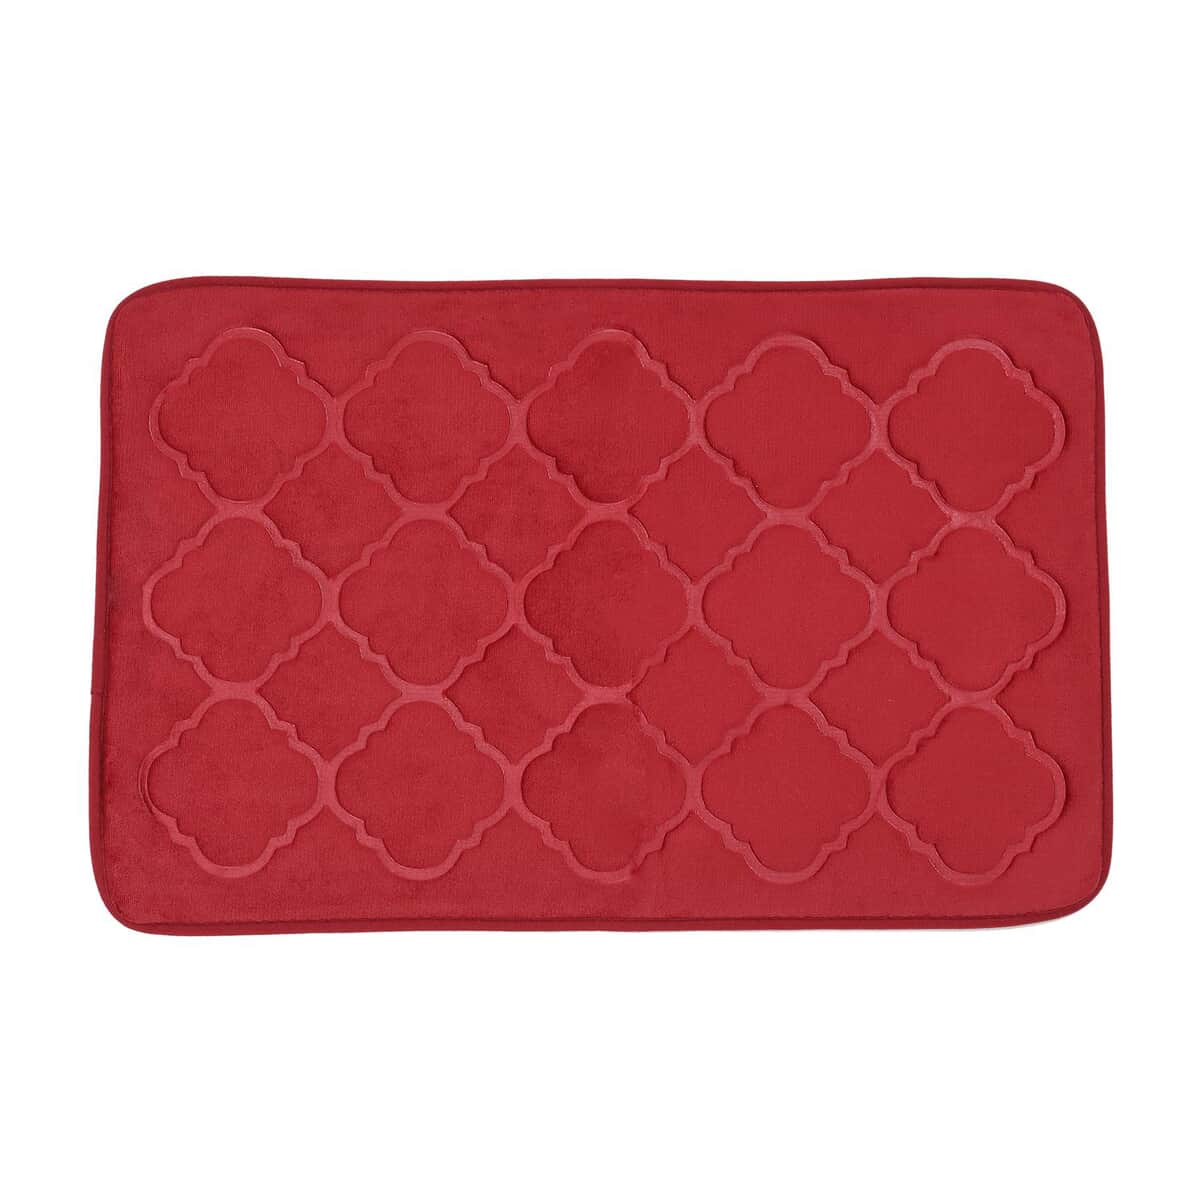 Homesmart Red Embossed Flannel Non-Woven Anti Slip Dot Backing Bath Mat and Contour Toilet Mat, Anti-Skid Quick Drying Handwash Bath Mat, Non Slip Bathroom Rug image number 4